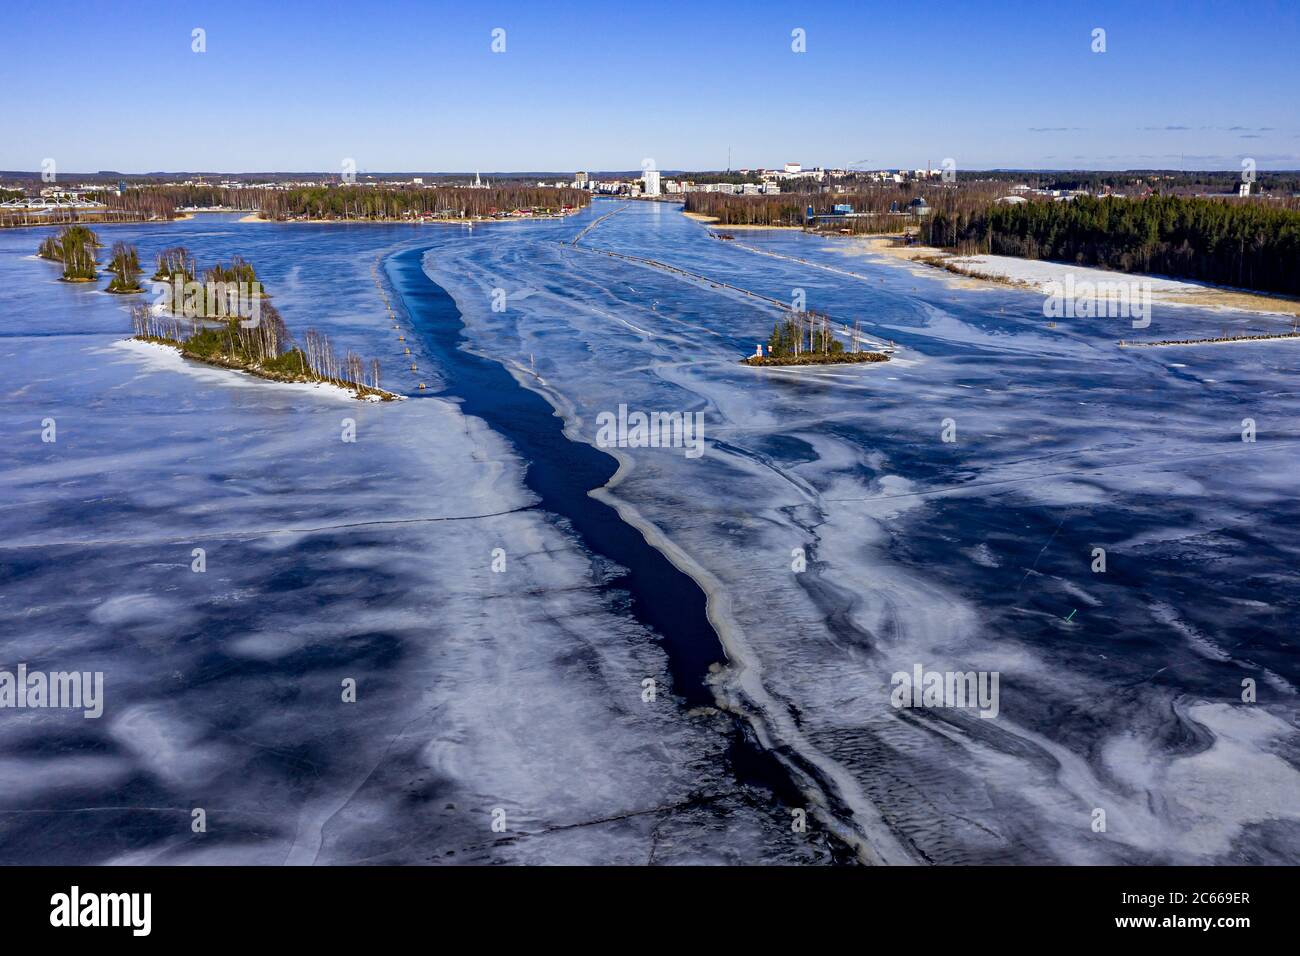 Aerial view of the Pielisjoki river near the Joensuu city. Ice-covered river in spring. Stock Photo